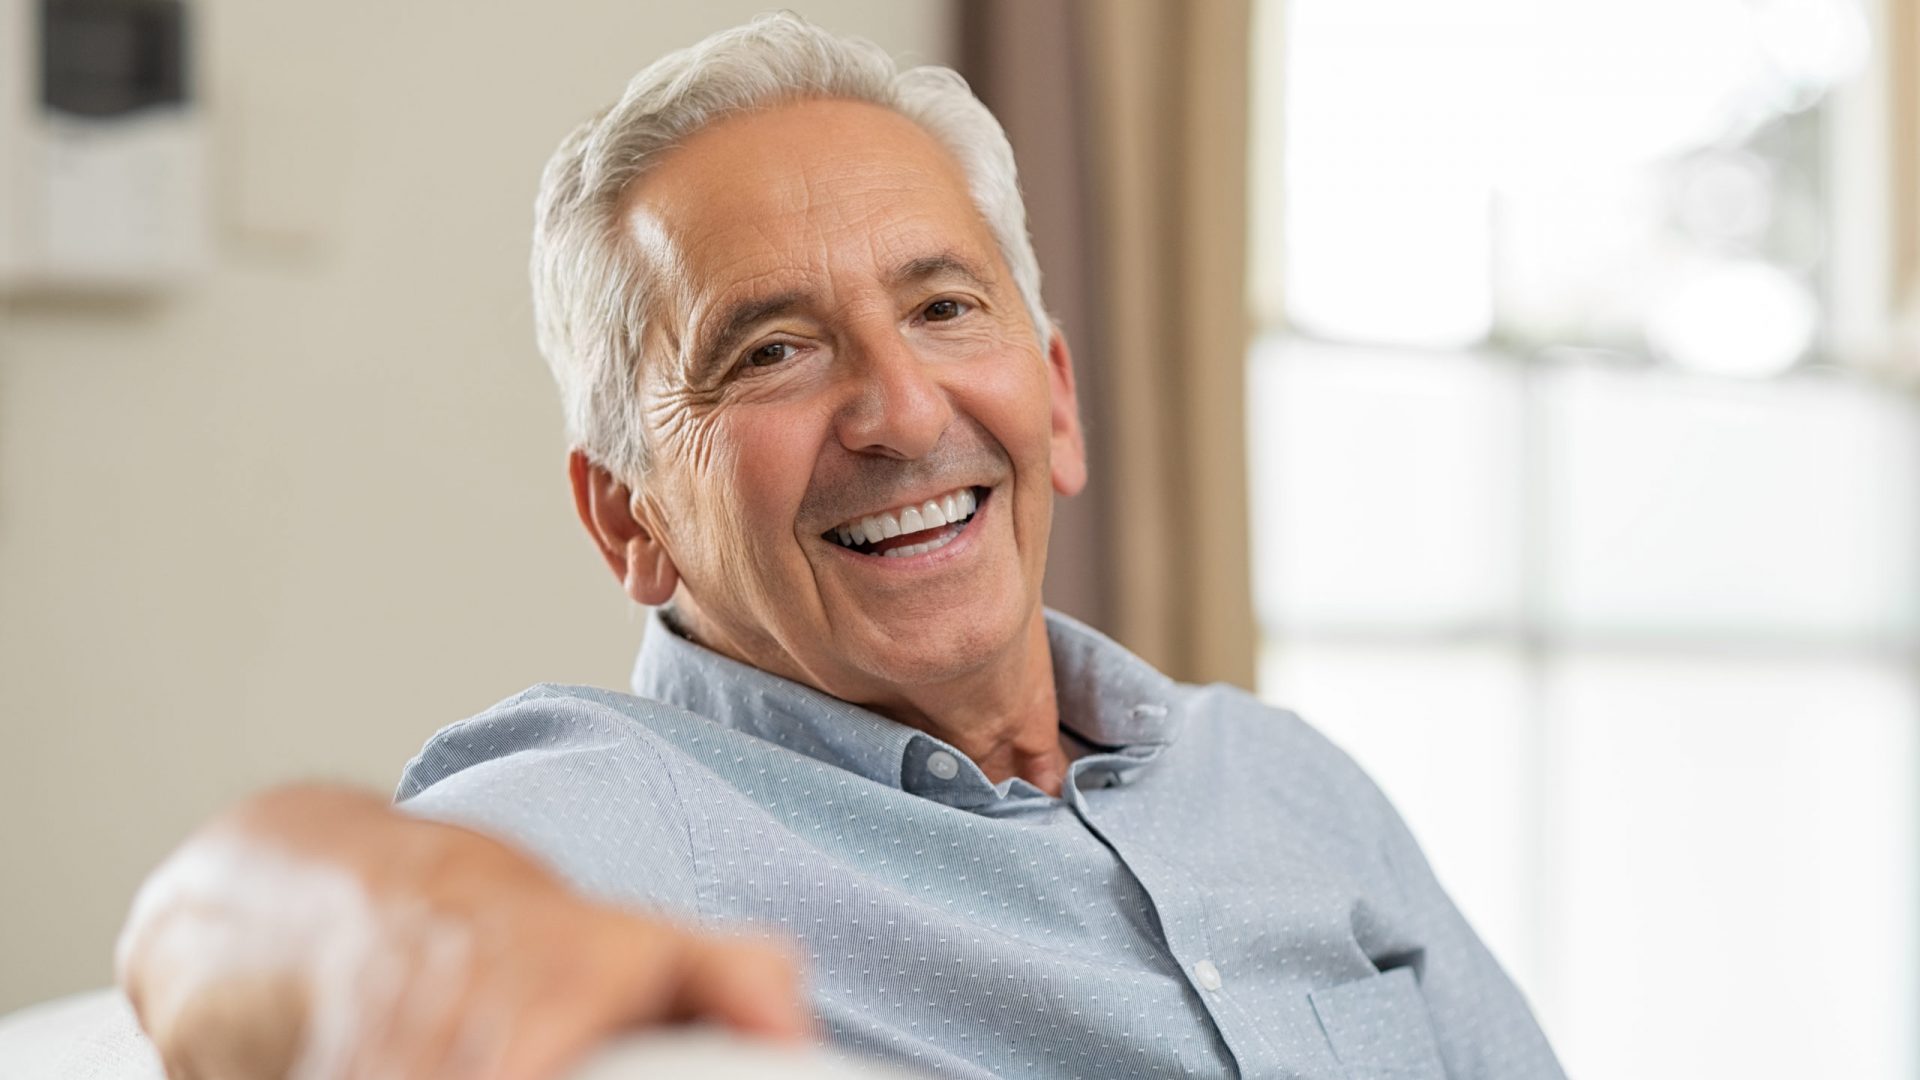 Portrait of happy senior man smiling at home. Old man relaxing on sofa and looking at camera. Portrait of elderly man enjoying retirement.